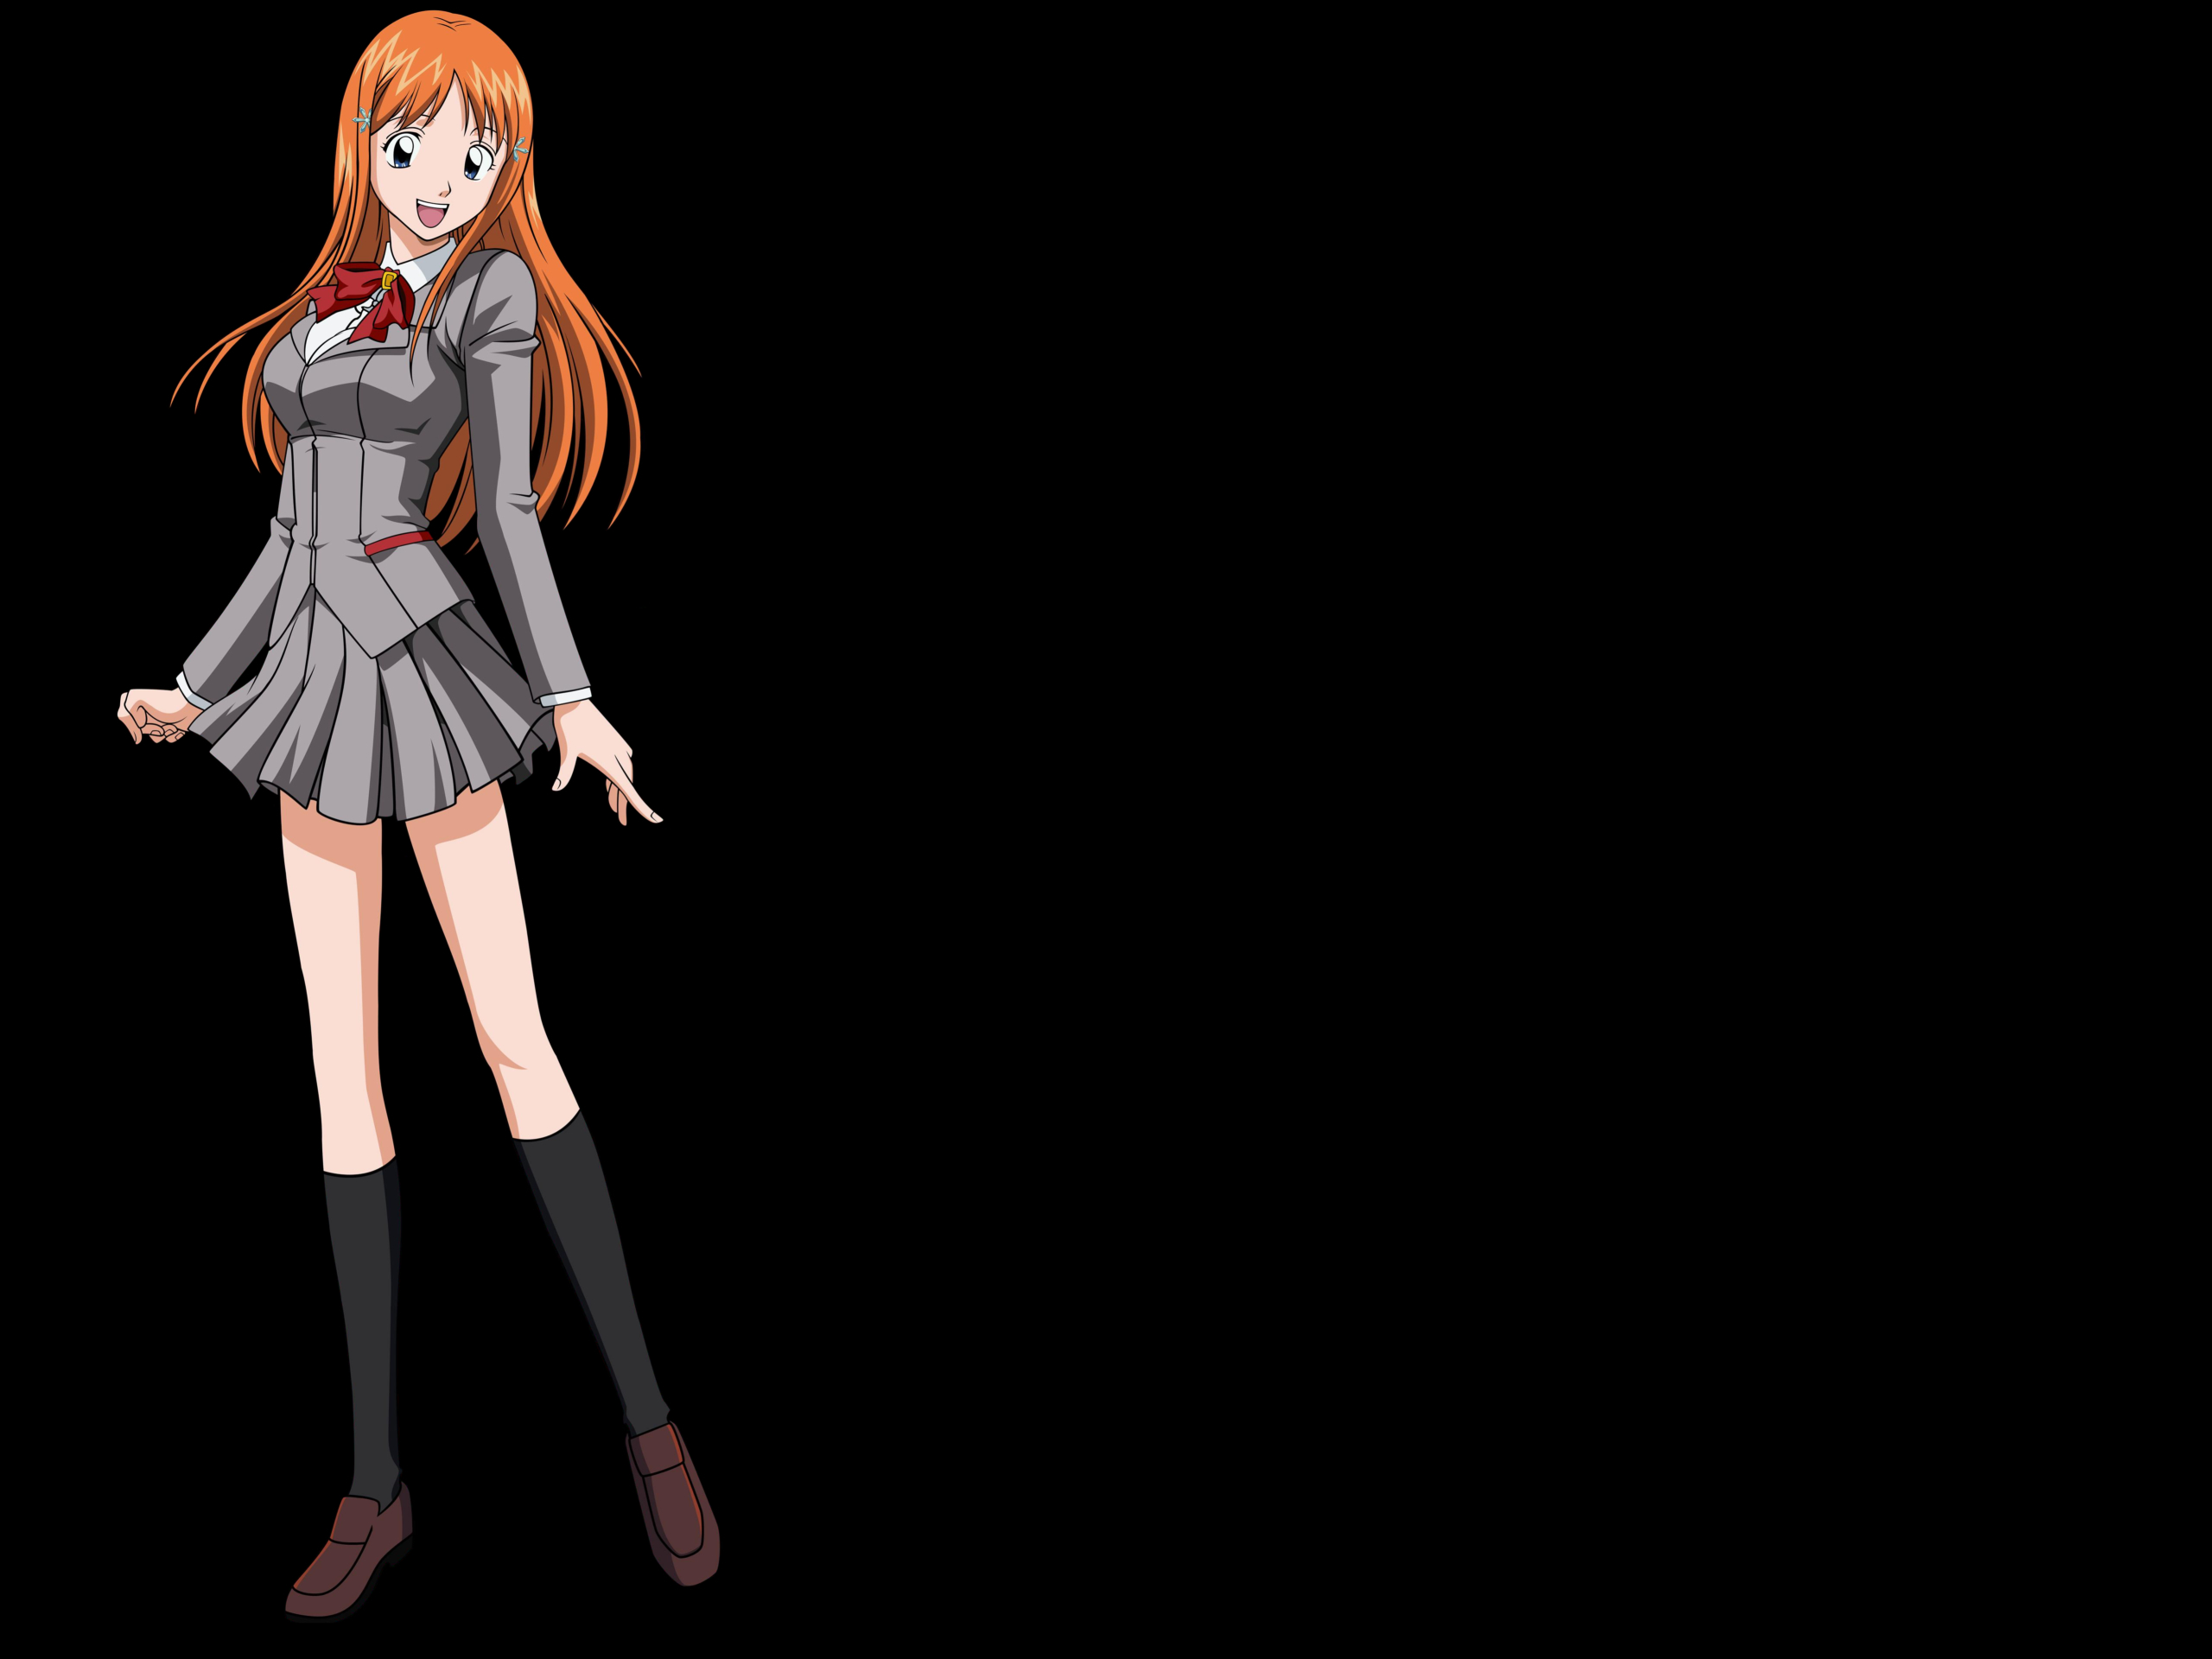 high quality hdtv wallpapers
 on ... orihime inoue girl high quality hdtv HD Wallpaper of Anime & Manga